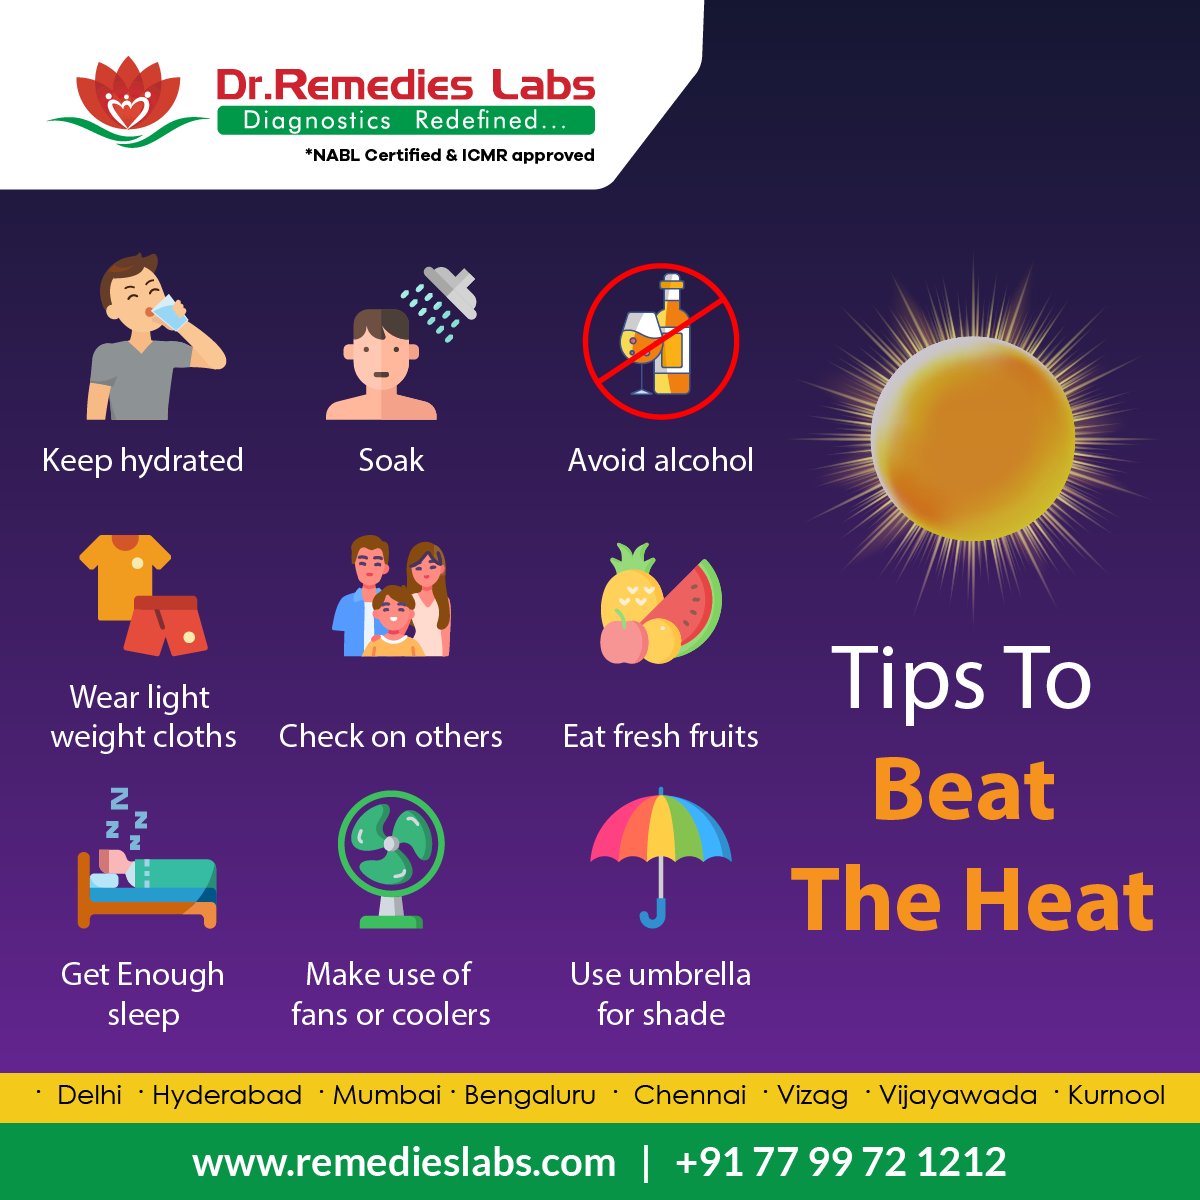 Make sure you're staying cool this summer with these quick and easy tips to beat the heat.

#StayCoolThisSummer #BeatTheHeat #SummerCoolingTips #StayChill #HeatWaveHacks #CoolSummerVibes #StayRefreshed #HeatBeatingTips #StayHydrated #remedieslabs #drremedieslabs